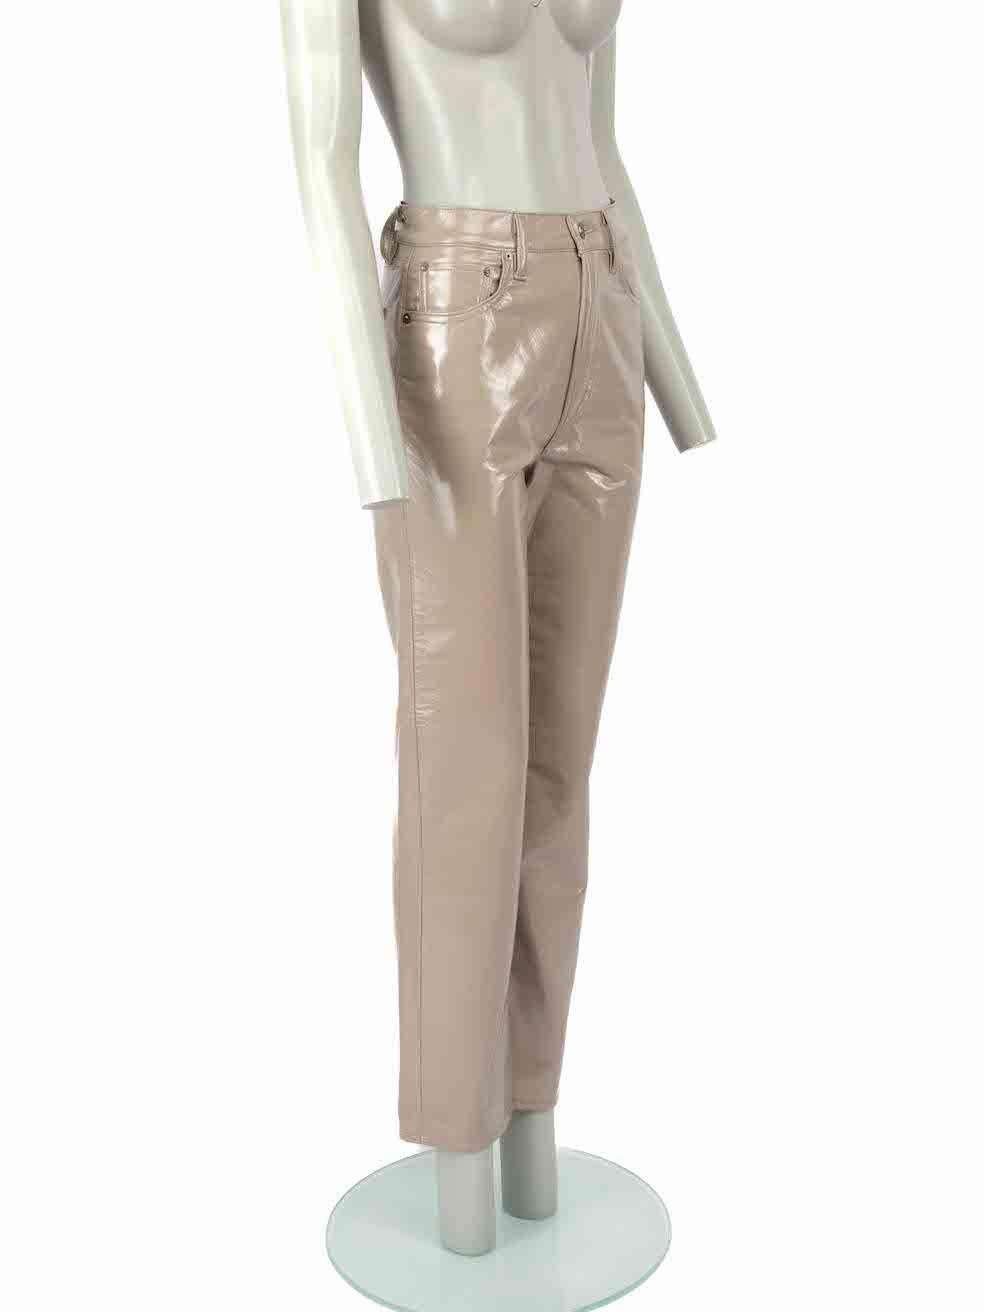 CONDITION is Very good. Hardly any visible wear to trousers is evident on this used Agolde designer resale item.
 
 Details
 Taupe
 Patent leather
 Trousers
 Straight leg
 Mid rise
 3x Front pockets
 2x Back pockets
 Fly zip and button fastening
 
